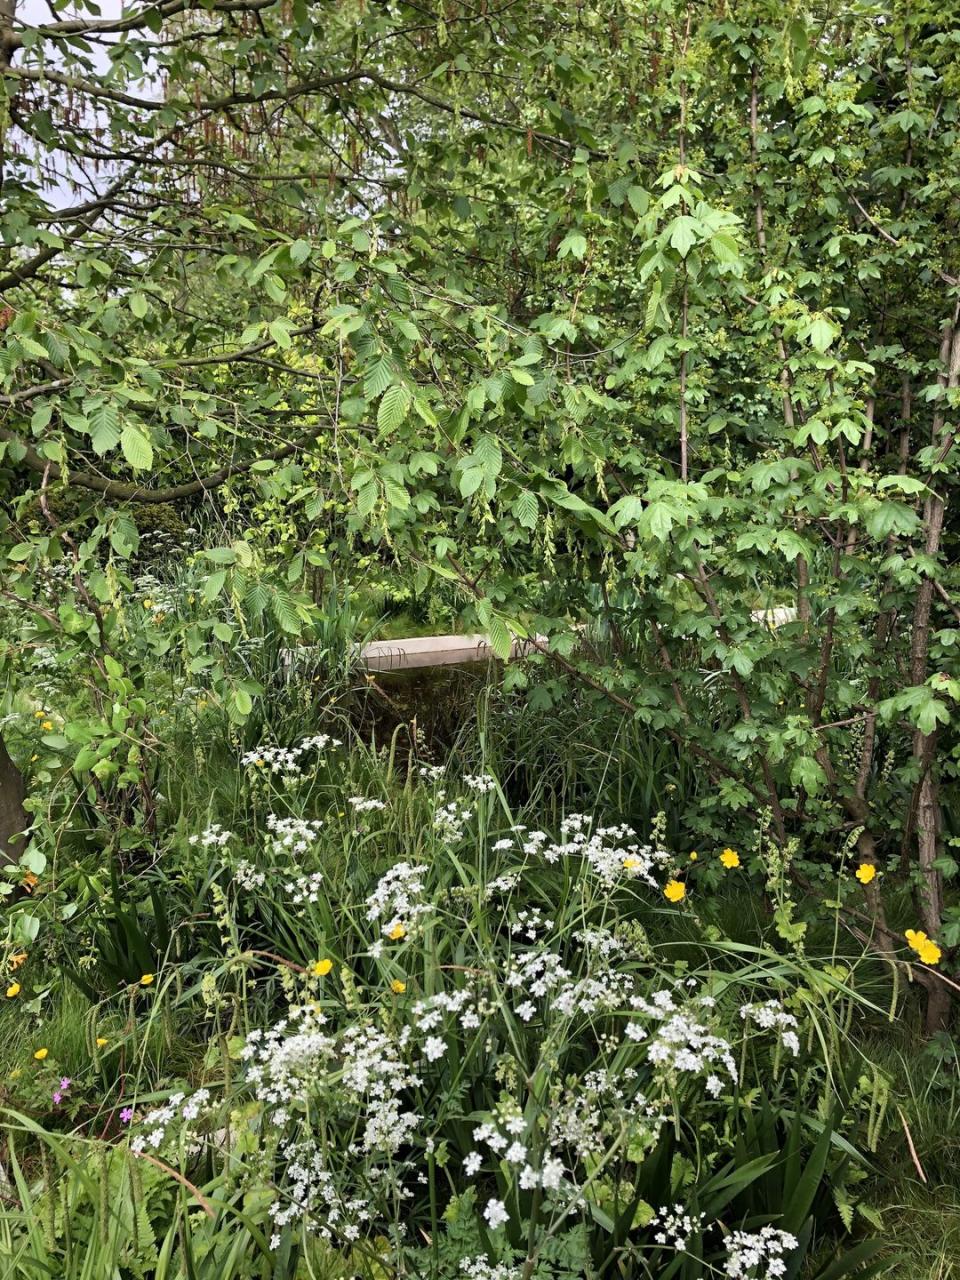 <p>The delicate white flowers and fern-like foliage of cow parsley has proved especially popular on Show Gardens this year, a planting trend that will add a naturalistic charm to any garden. </p><p><strong>Andrew Duff</strong> uses the umbrella-like clusters of white frothy flowers to decorate his woodland glade alongside bright yellow buttercups, and <strong>Helen Elks-Smith </strong>incorporates it into a swathe of native hedgerow that wraps around the central pavilion on her garden for Warner’s Distillery.</p><p>Elsewhere, <strong>Jo Thompson </strong>adds it to a mass of dynamic planting around a central stone colonnade creating a soft, textured feel. </p><p>Image: Andrew Duff MSGD</p>